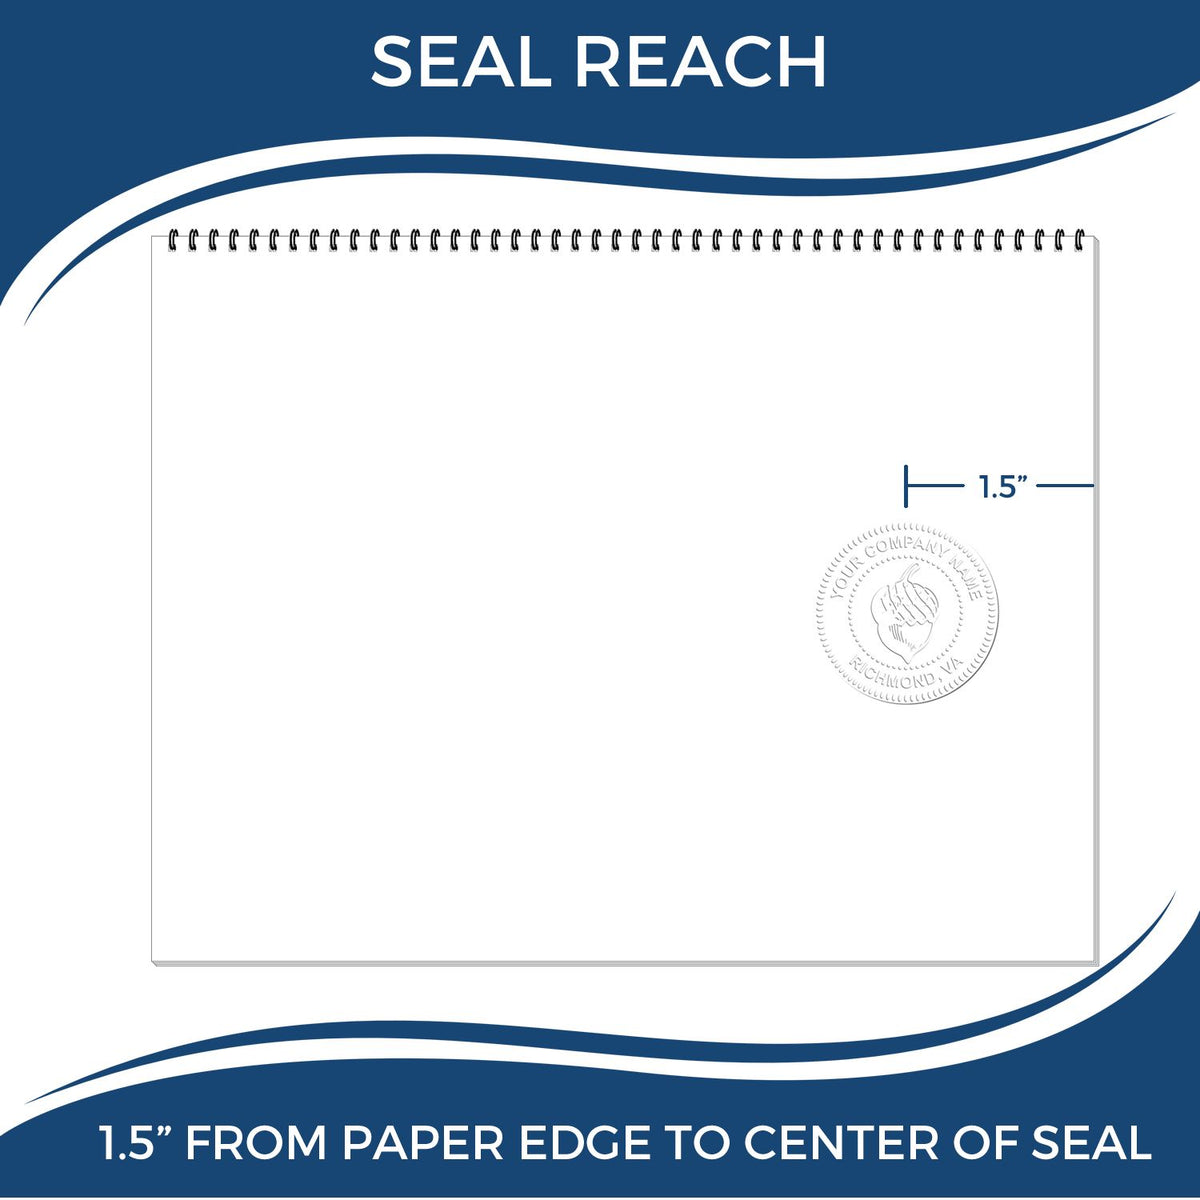 An infographic showing the seal reach which is represented by a ruler and a miniature seal image of the Gift Louisiana Engineer Seal